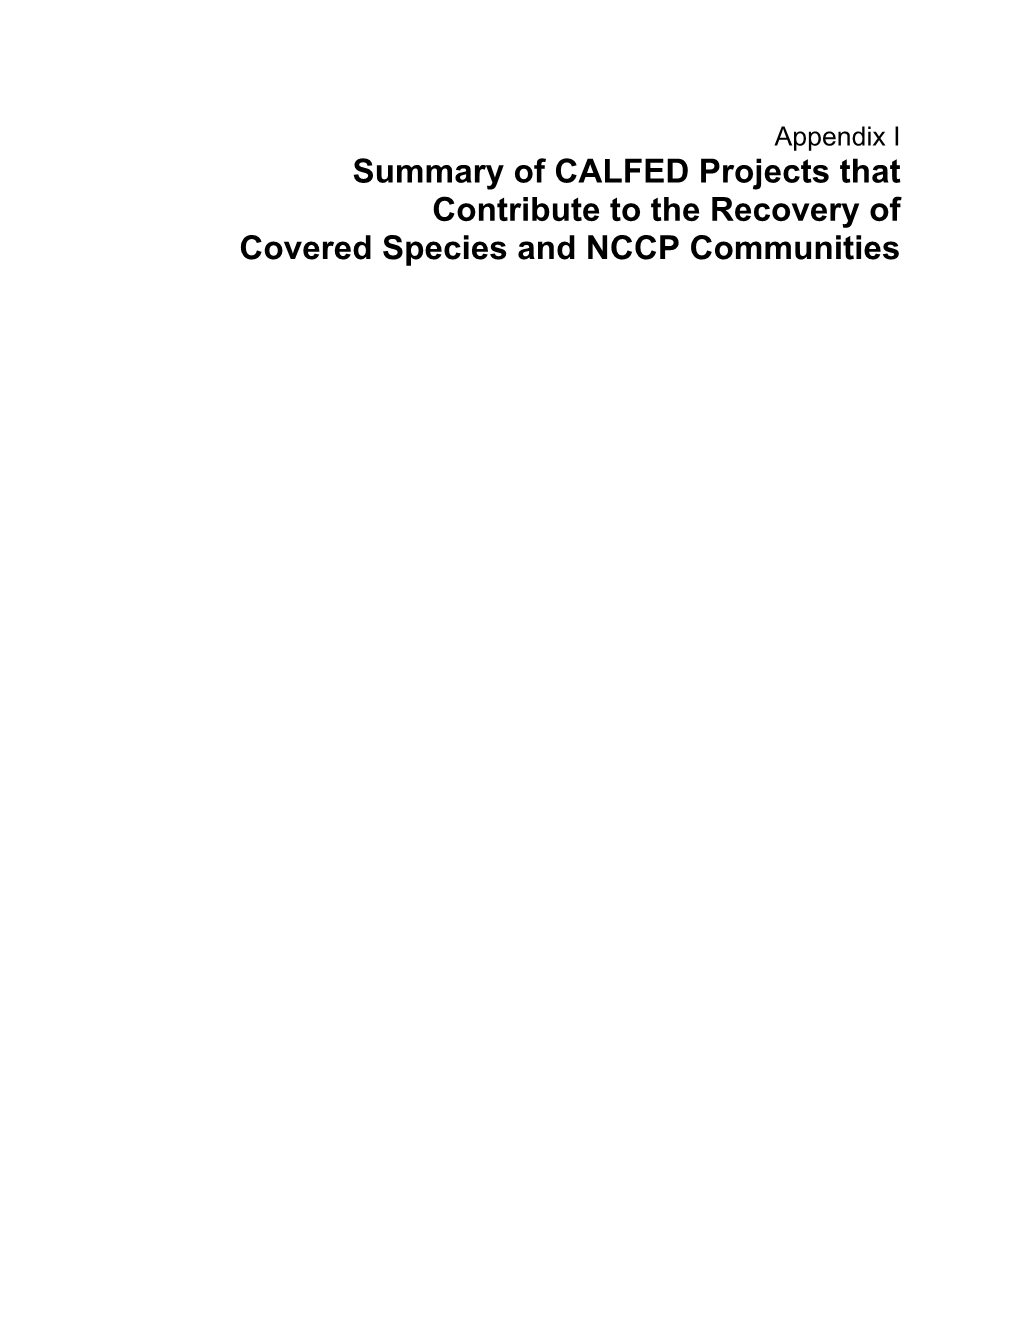 Summary of CALFED Projects That Contribute to the Recovery Of